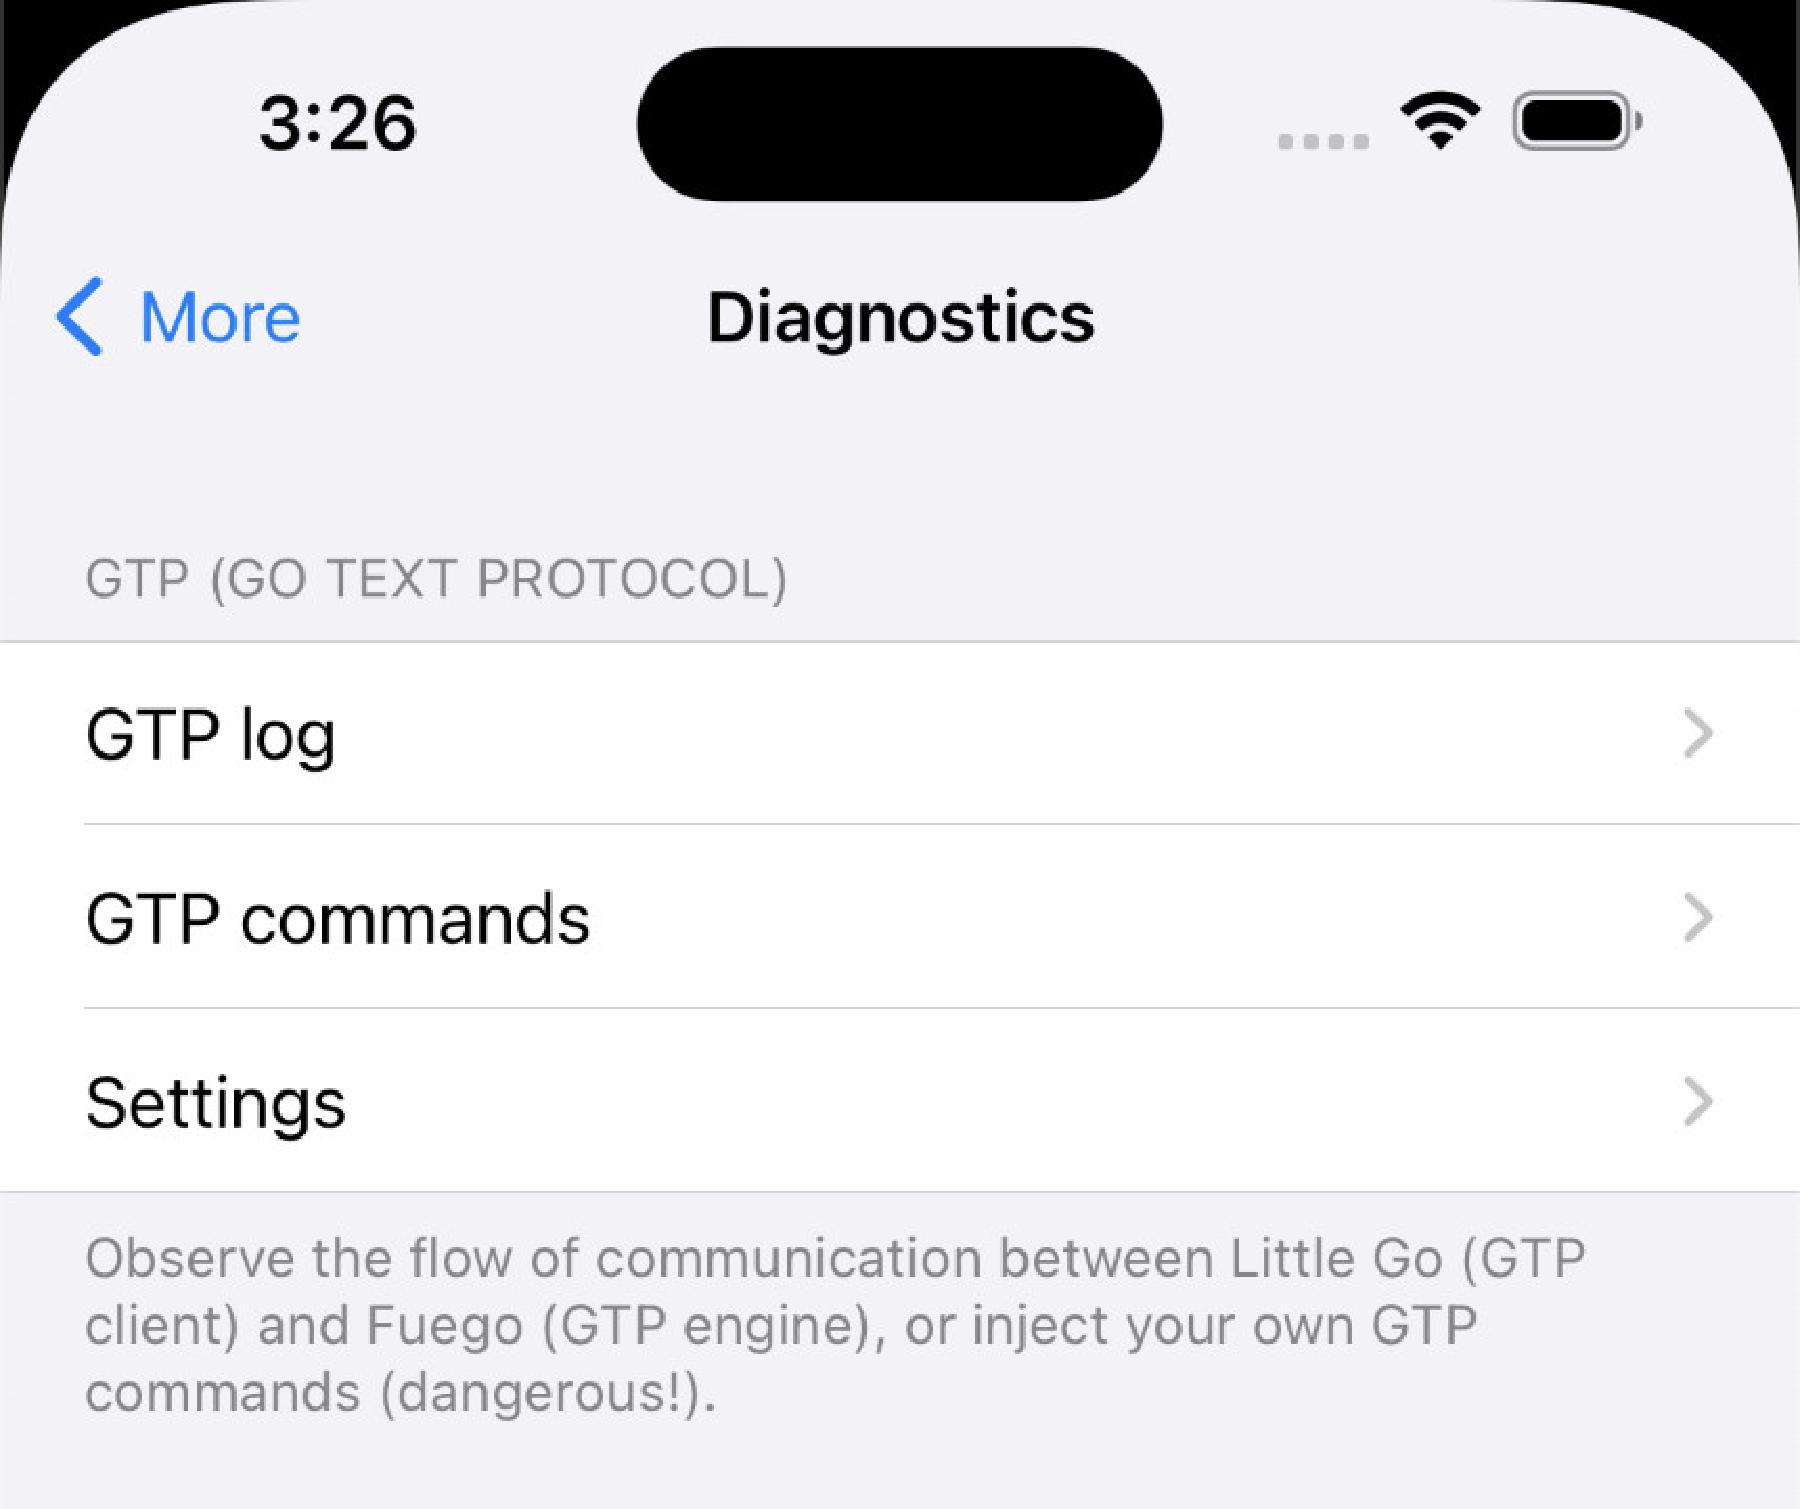 GTP-related items in the Diagnostics area of the app